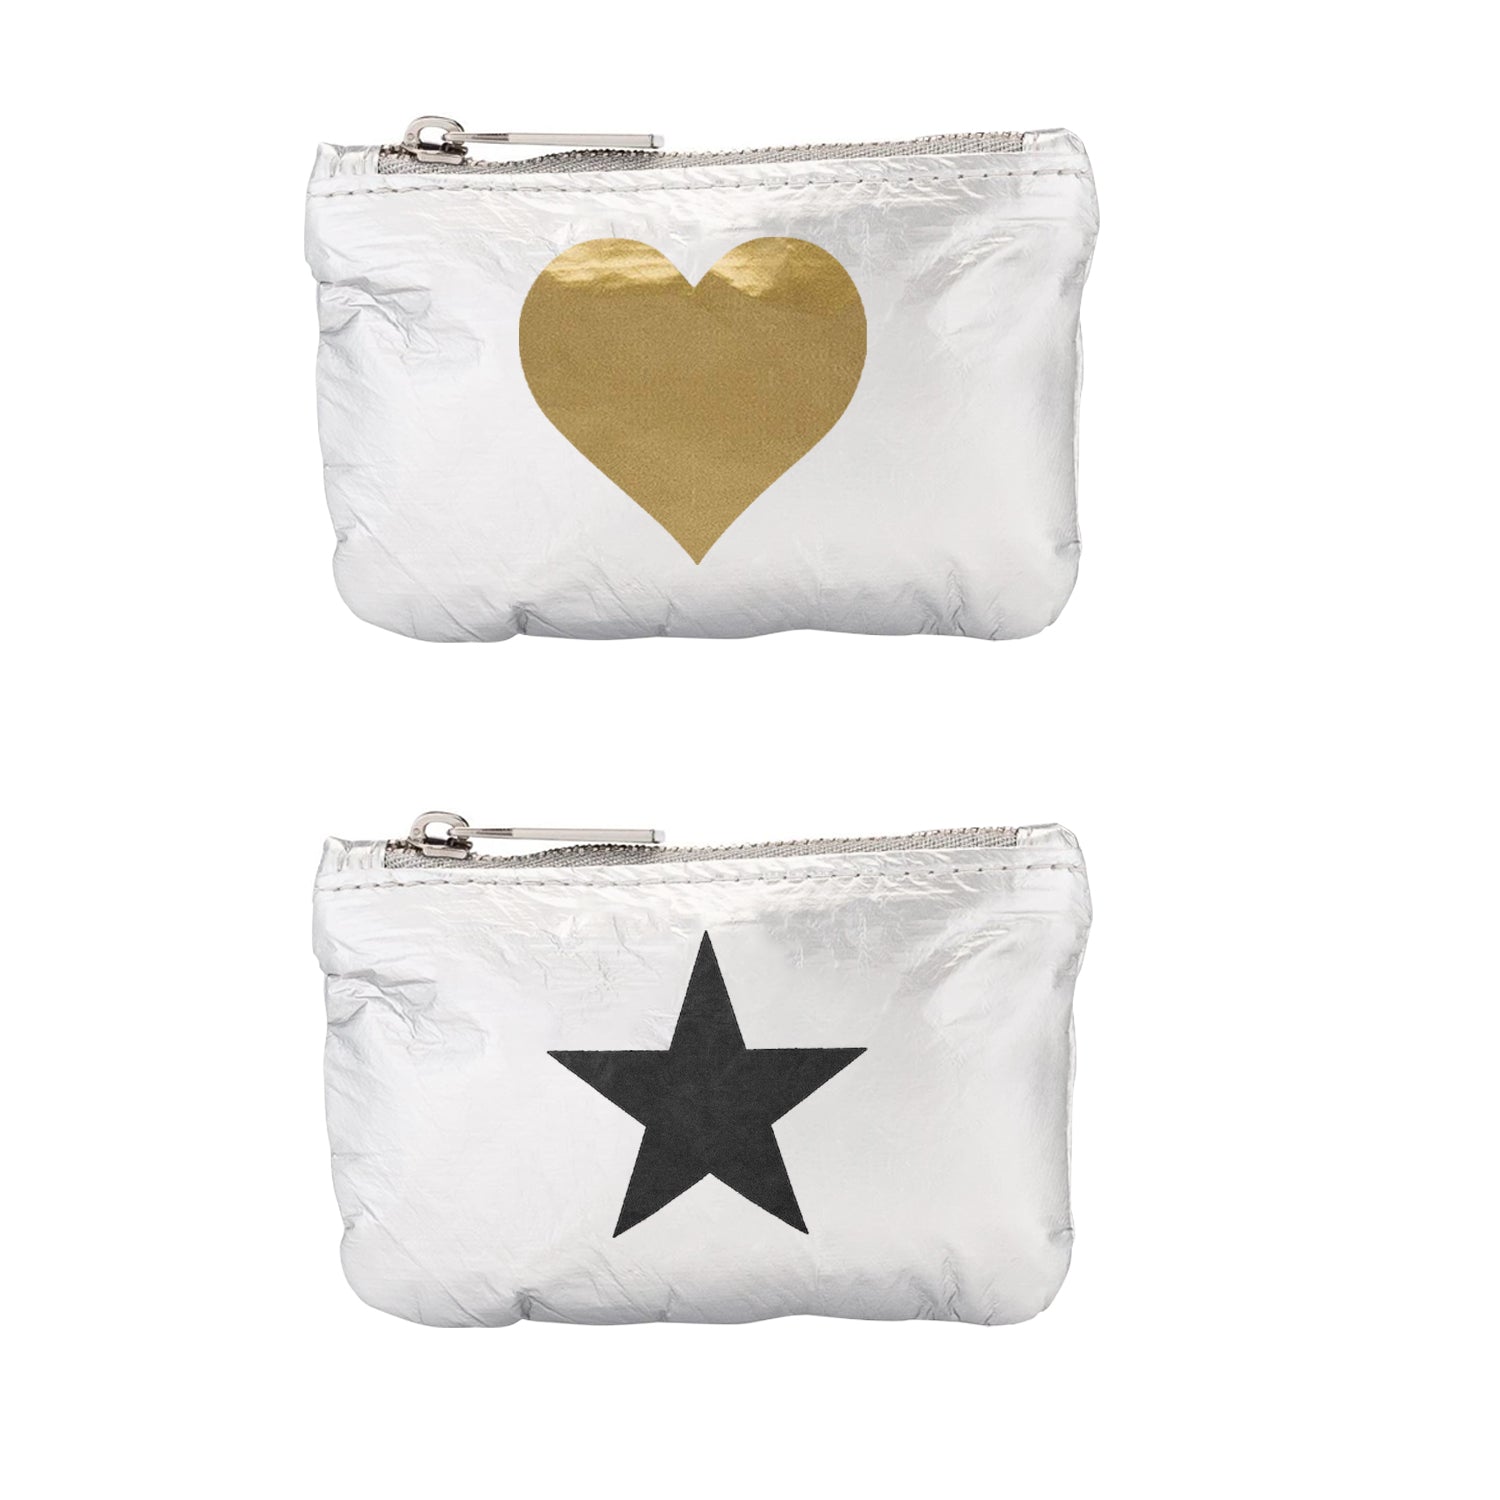 Wedding Day Cosmetic Bags for Every Bride